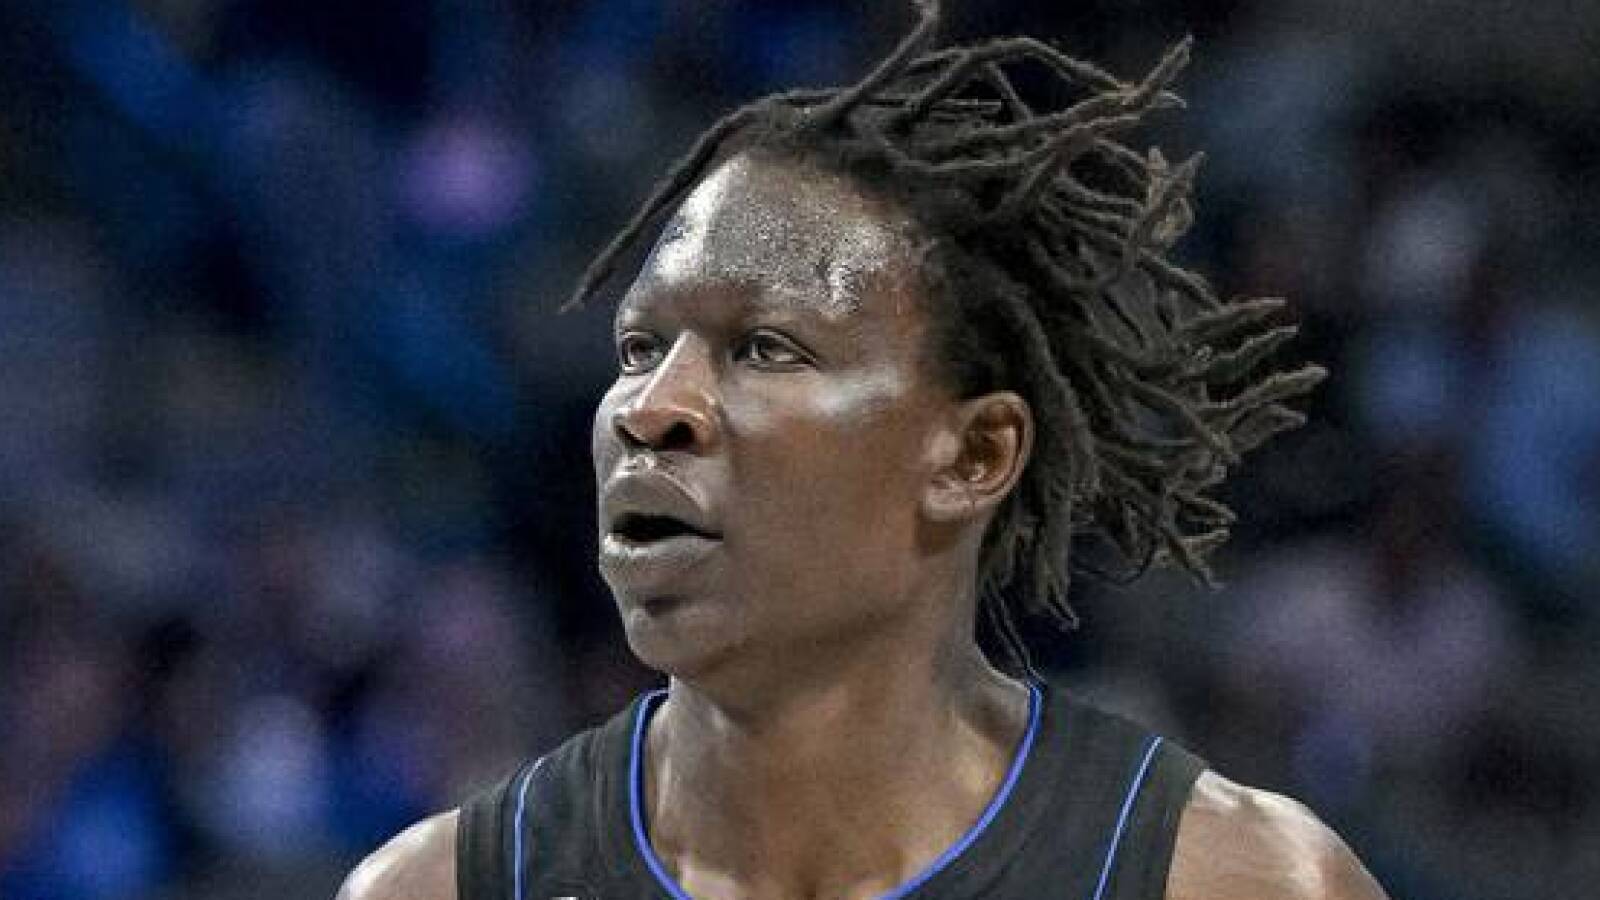 Bol is the king of the preseason for the Magic